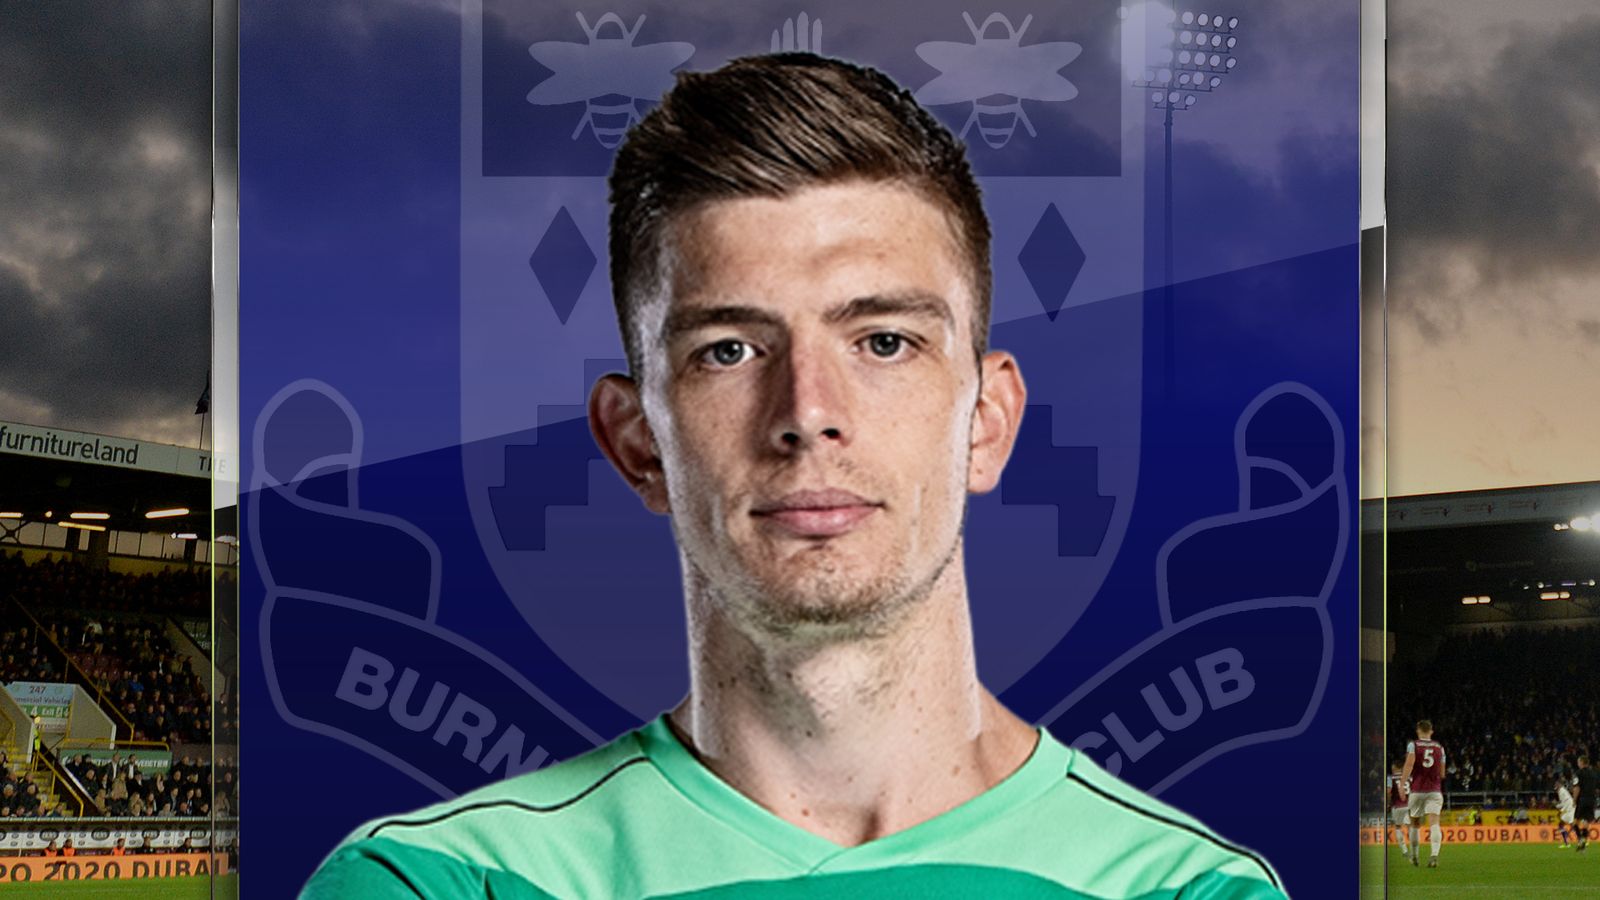 Nick Pope Interview: Burnley Goalkeeper On Watching England, Claiming Crosses And His Role As A Sweeper Keeper